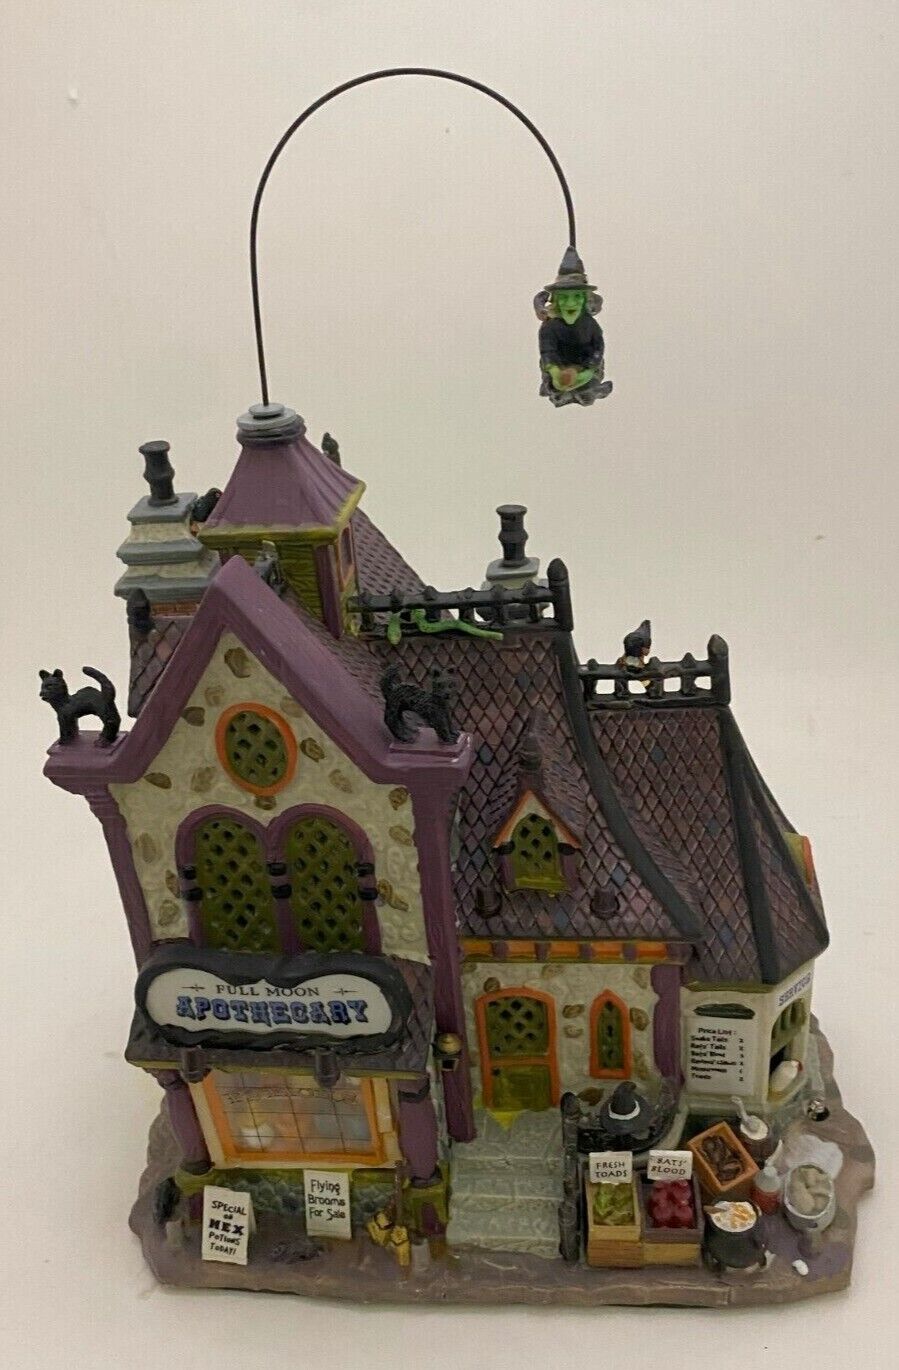 Full Moon Apothecary Lemax Spooky Town Collection Used Price reduced